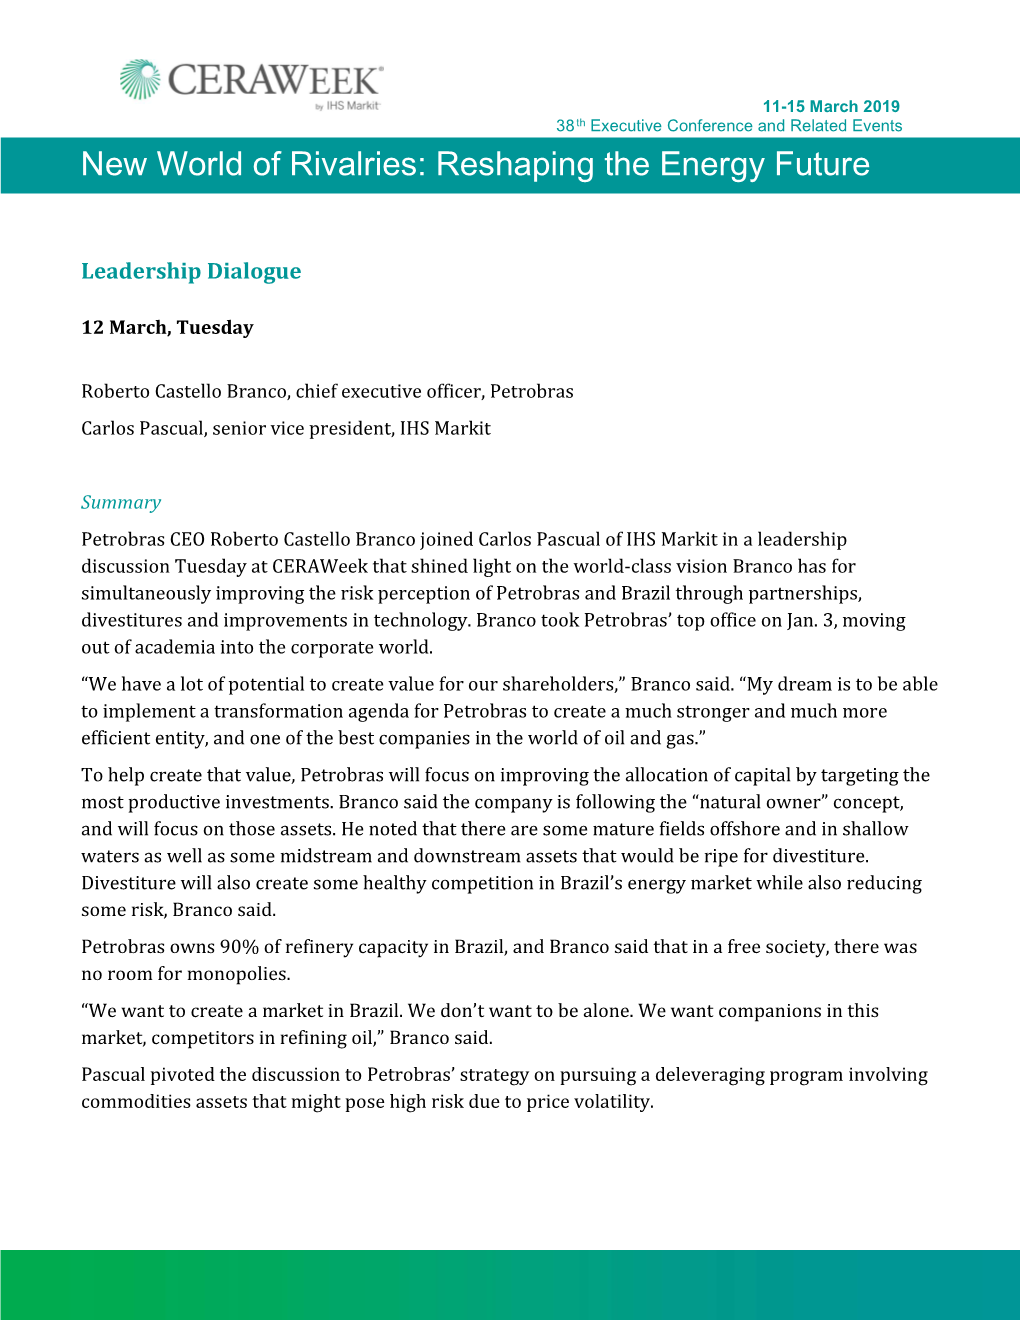 New World of Rivalries: Reshaping the Energy Future